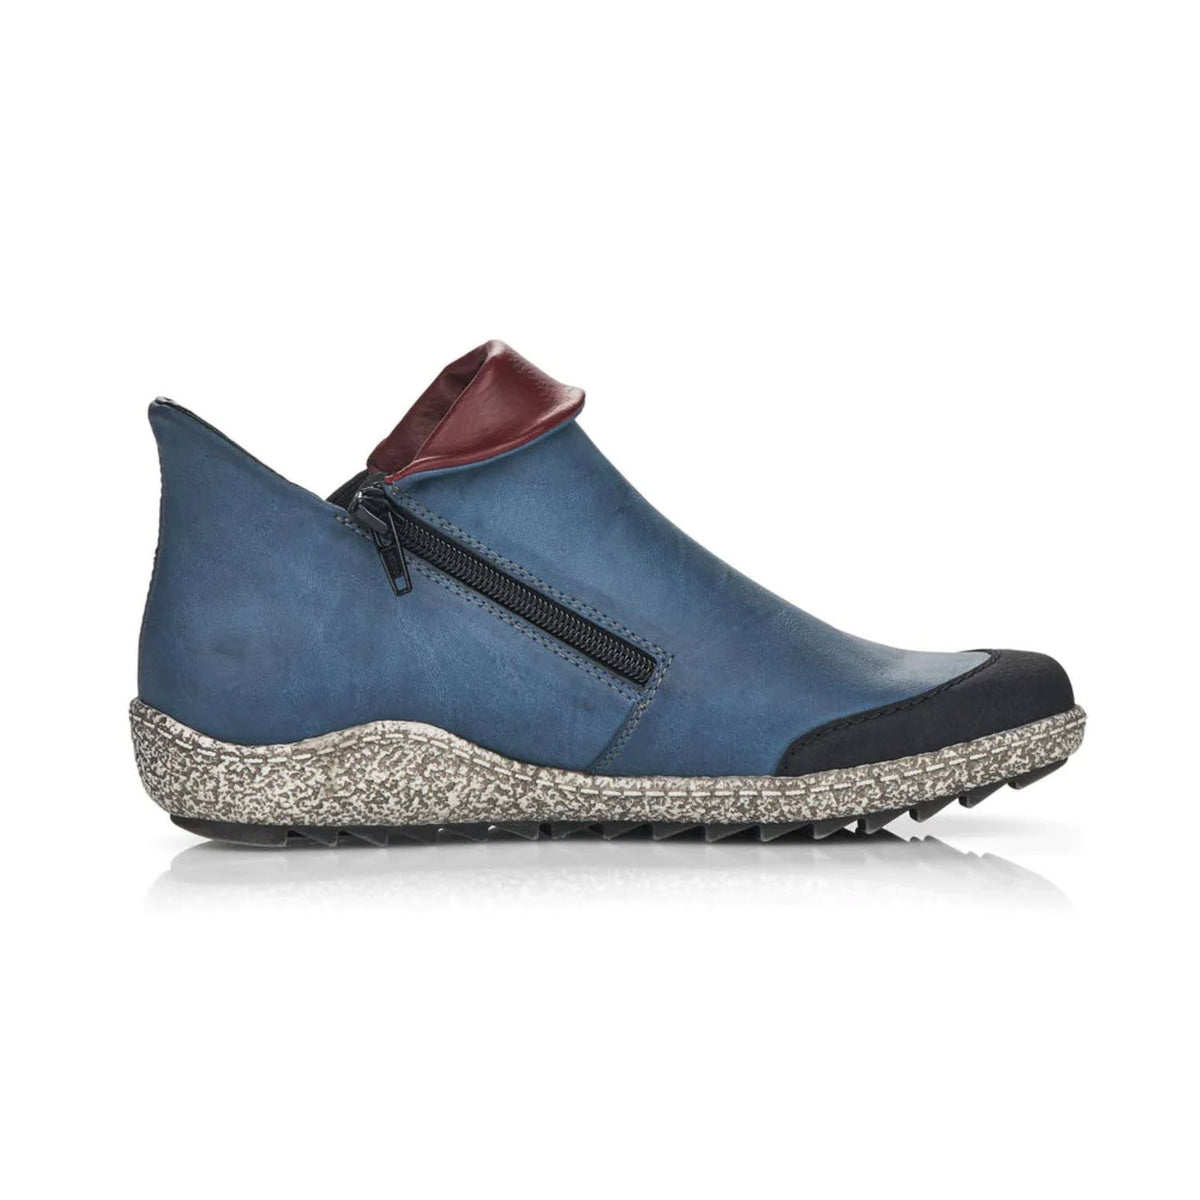 A blue antistress Rieker walking shoe with a side zipper, a contrasting brown Faux Leather patch at the back, and a speckled sole.